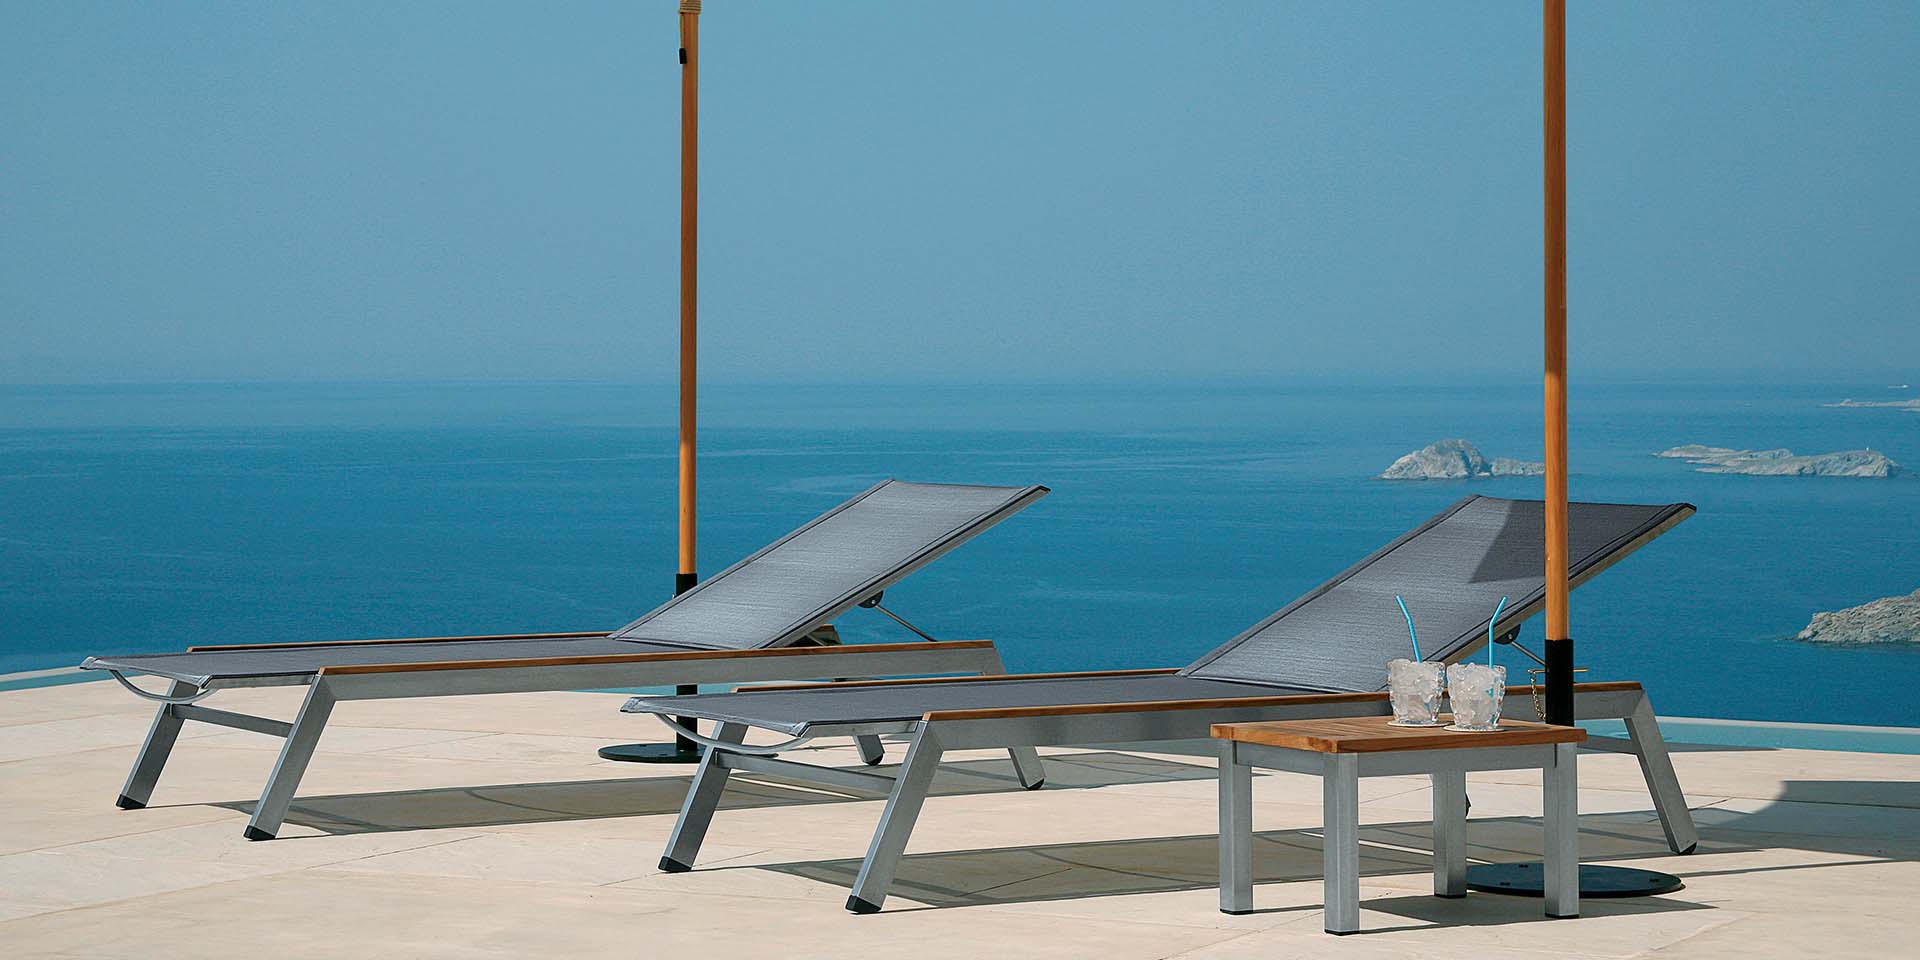 Equinox Occasional Low Lounger Table 49 Rectangular for 1EQPL - Powder coated